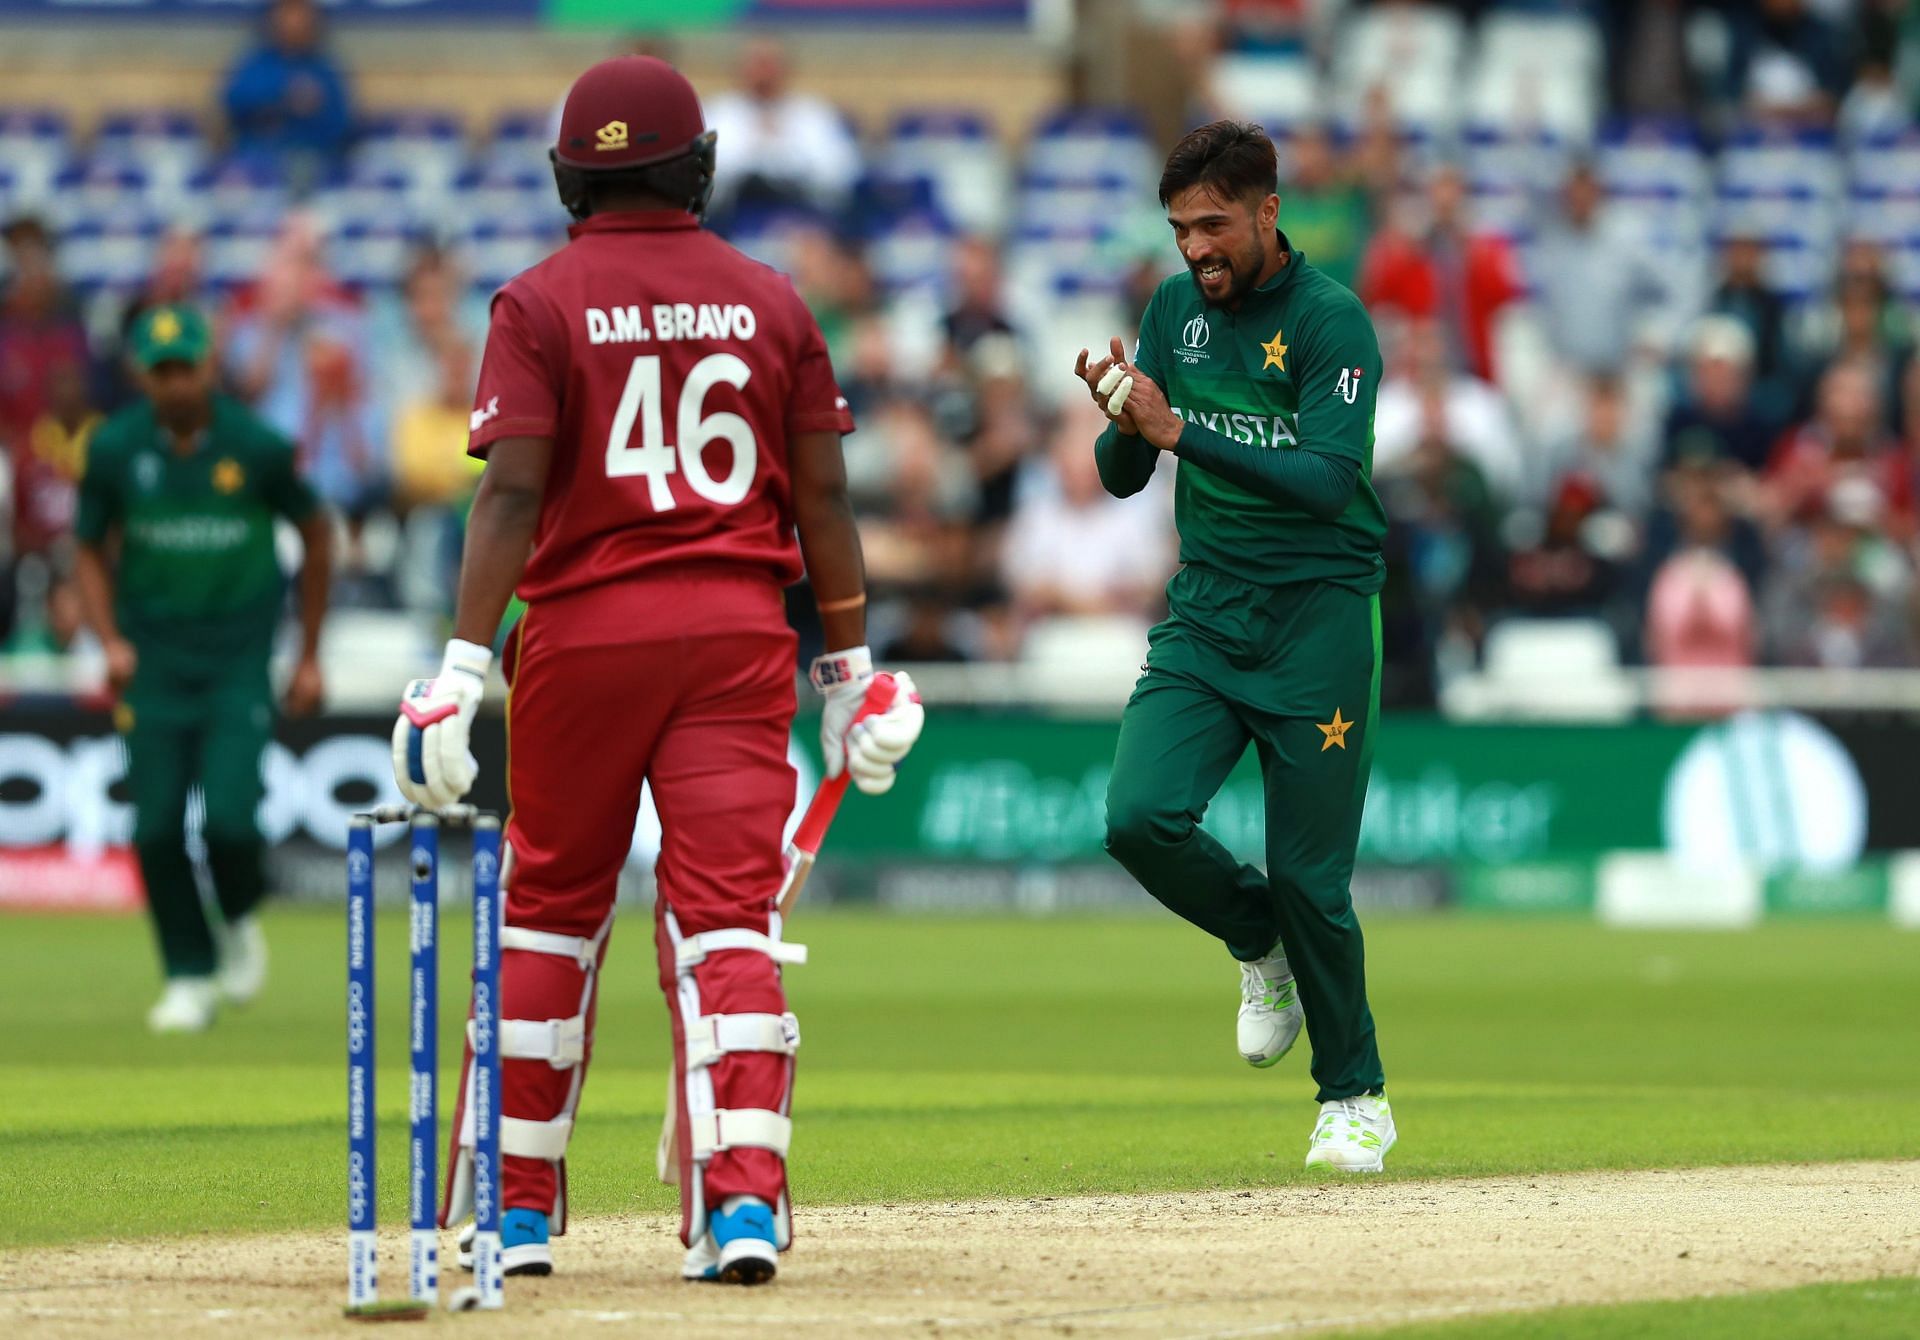 Mohammad Amir played in the 2019 World Cup. (Credits: Getty)